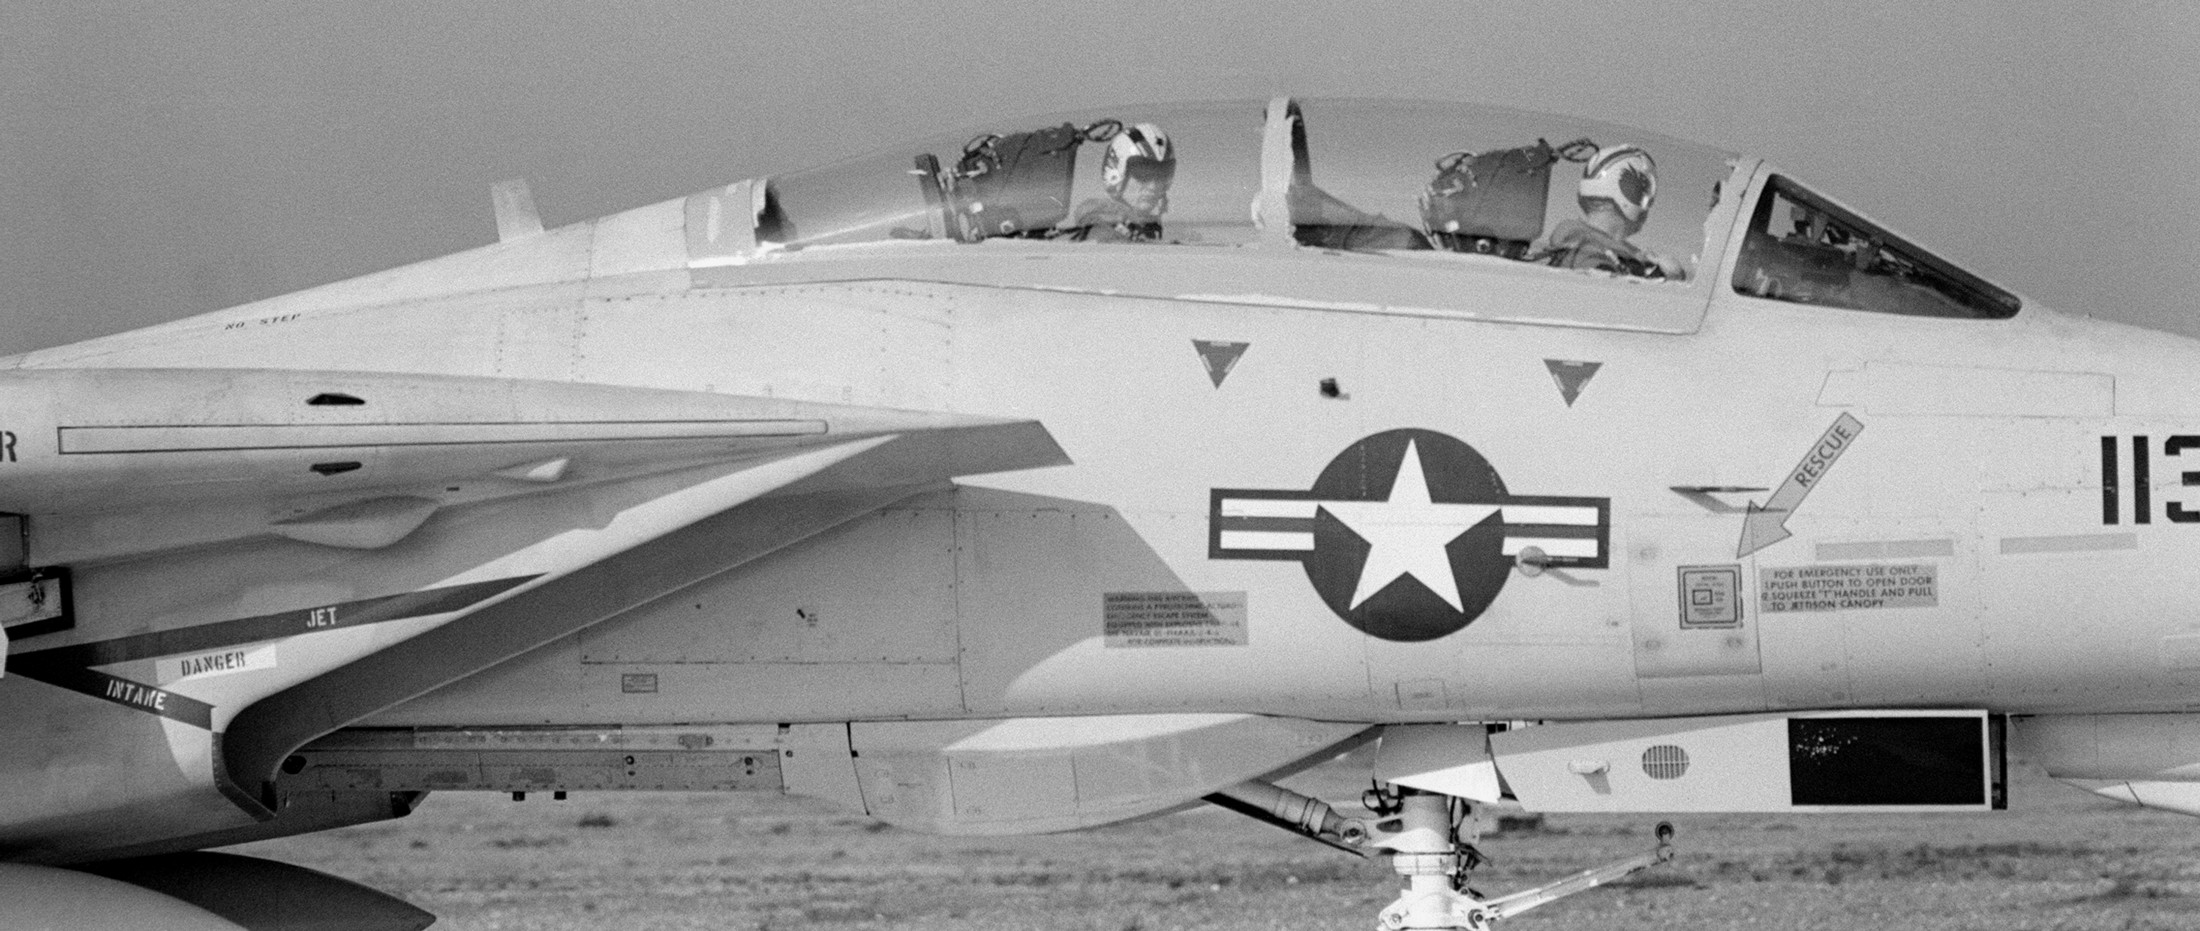 vf-1 wolfpack fighter squadron f-14a tomcat carrier air wing cvw-2 nas miramar 48